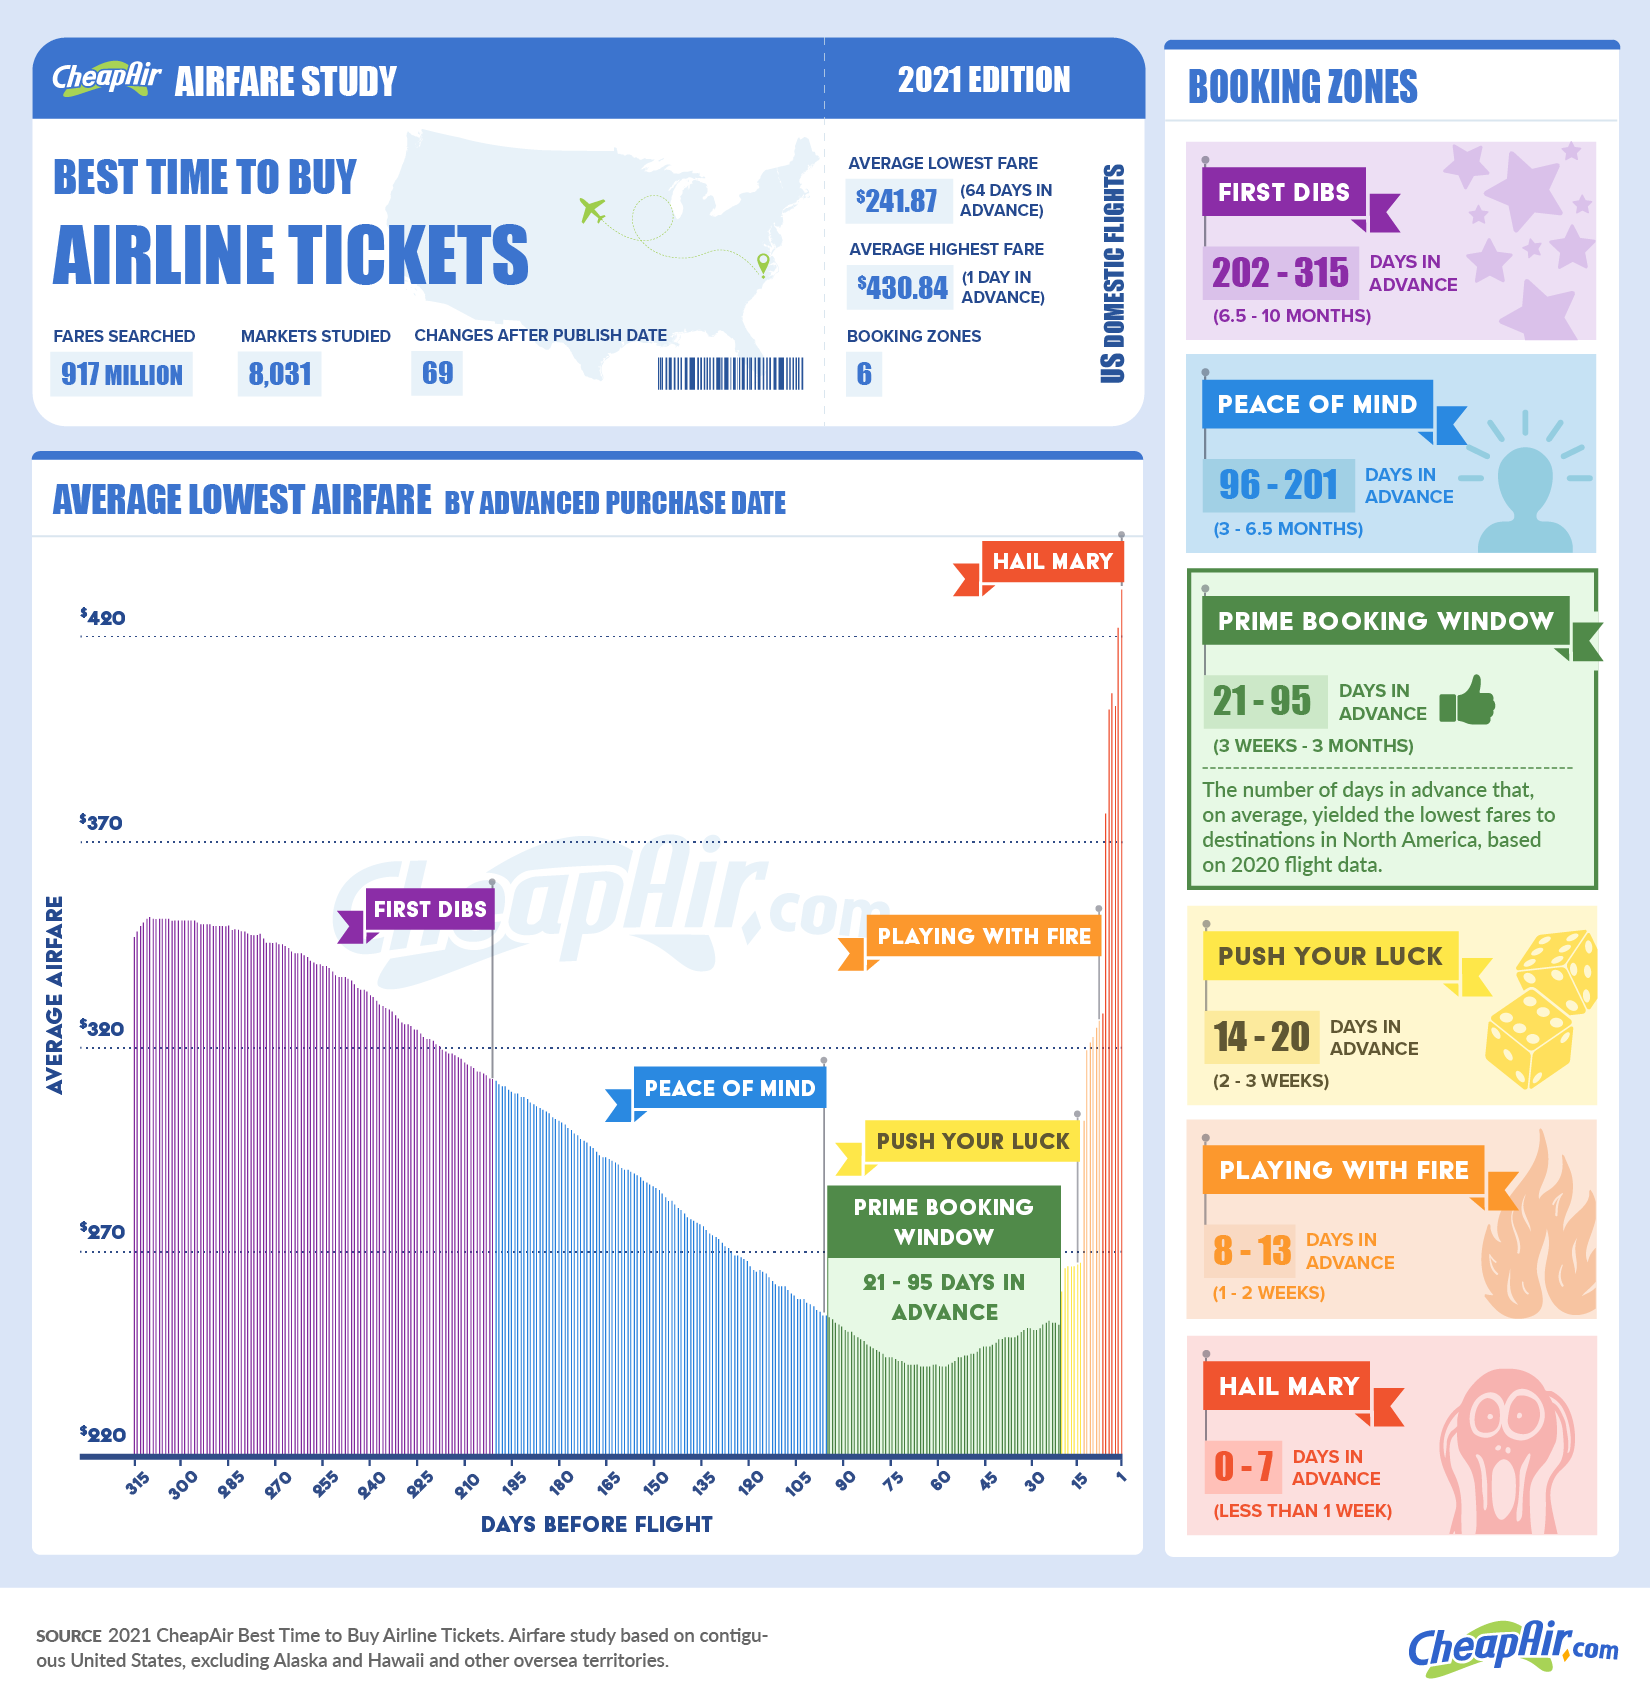 Cheapair.com when to buy airfare study 2021 booking zones